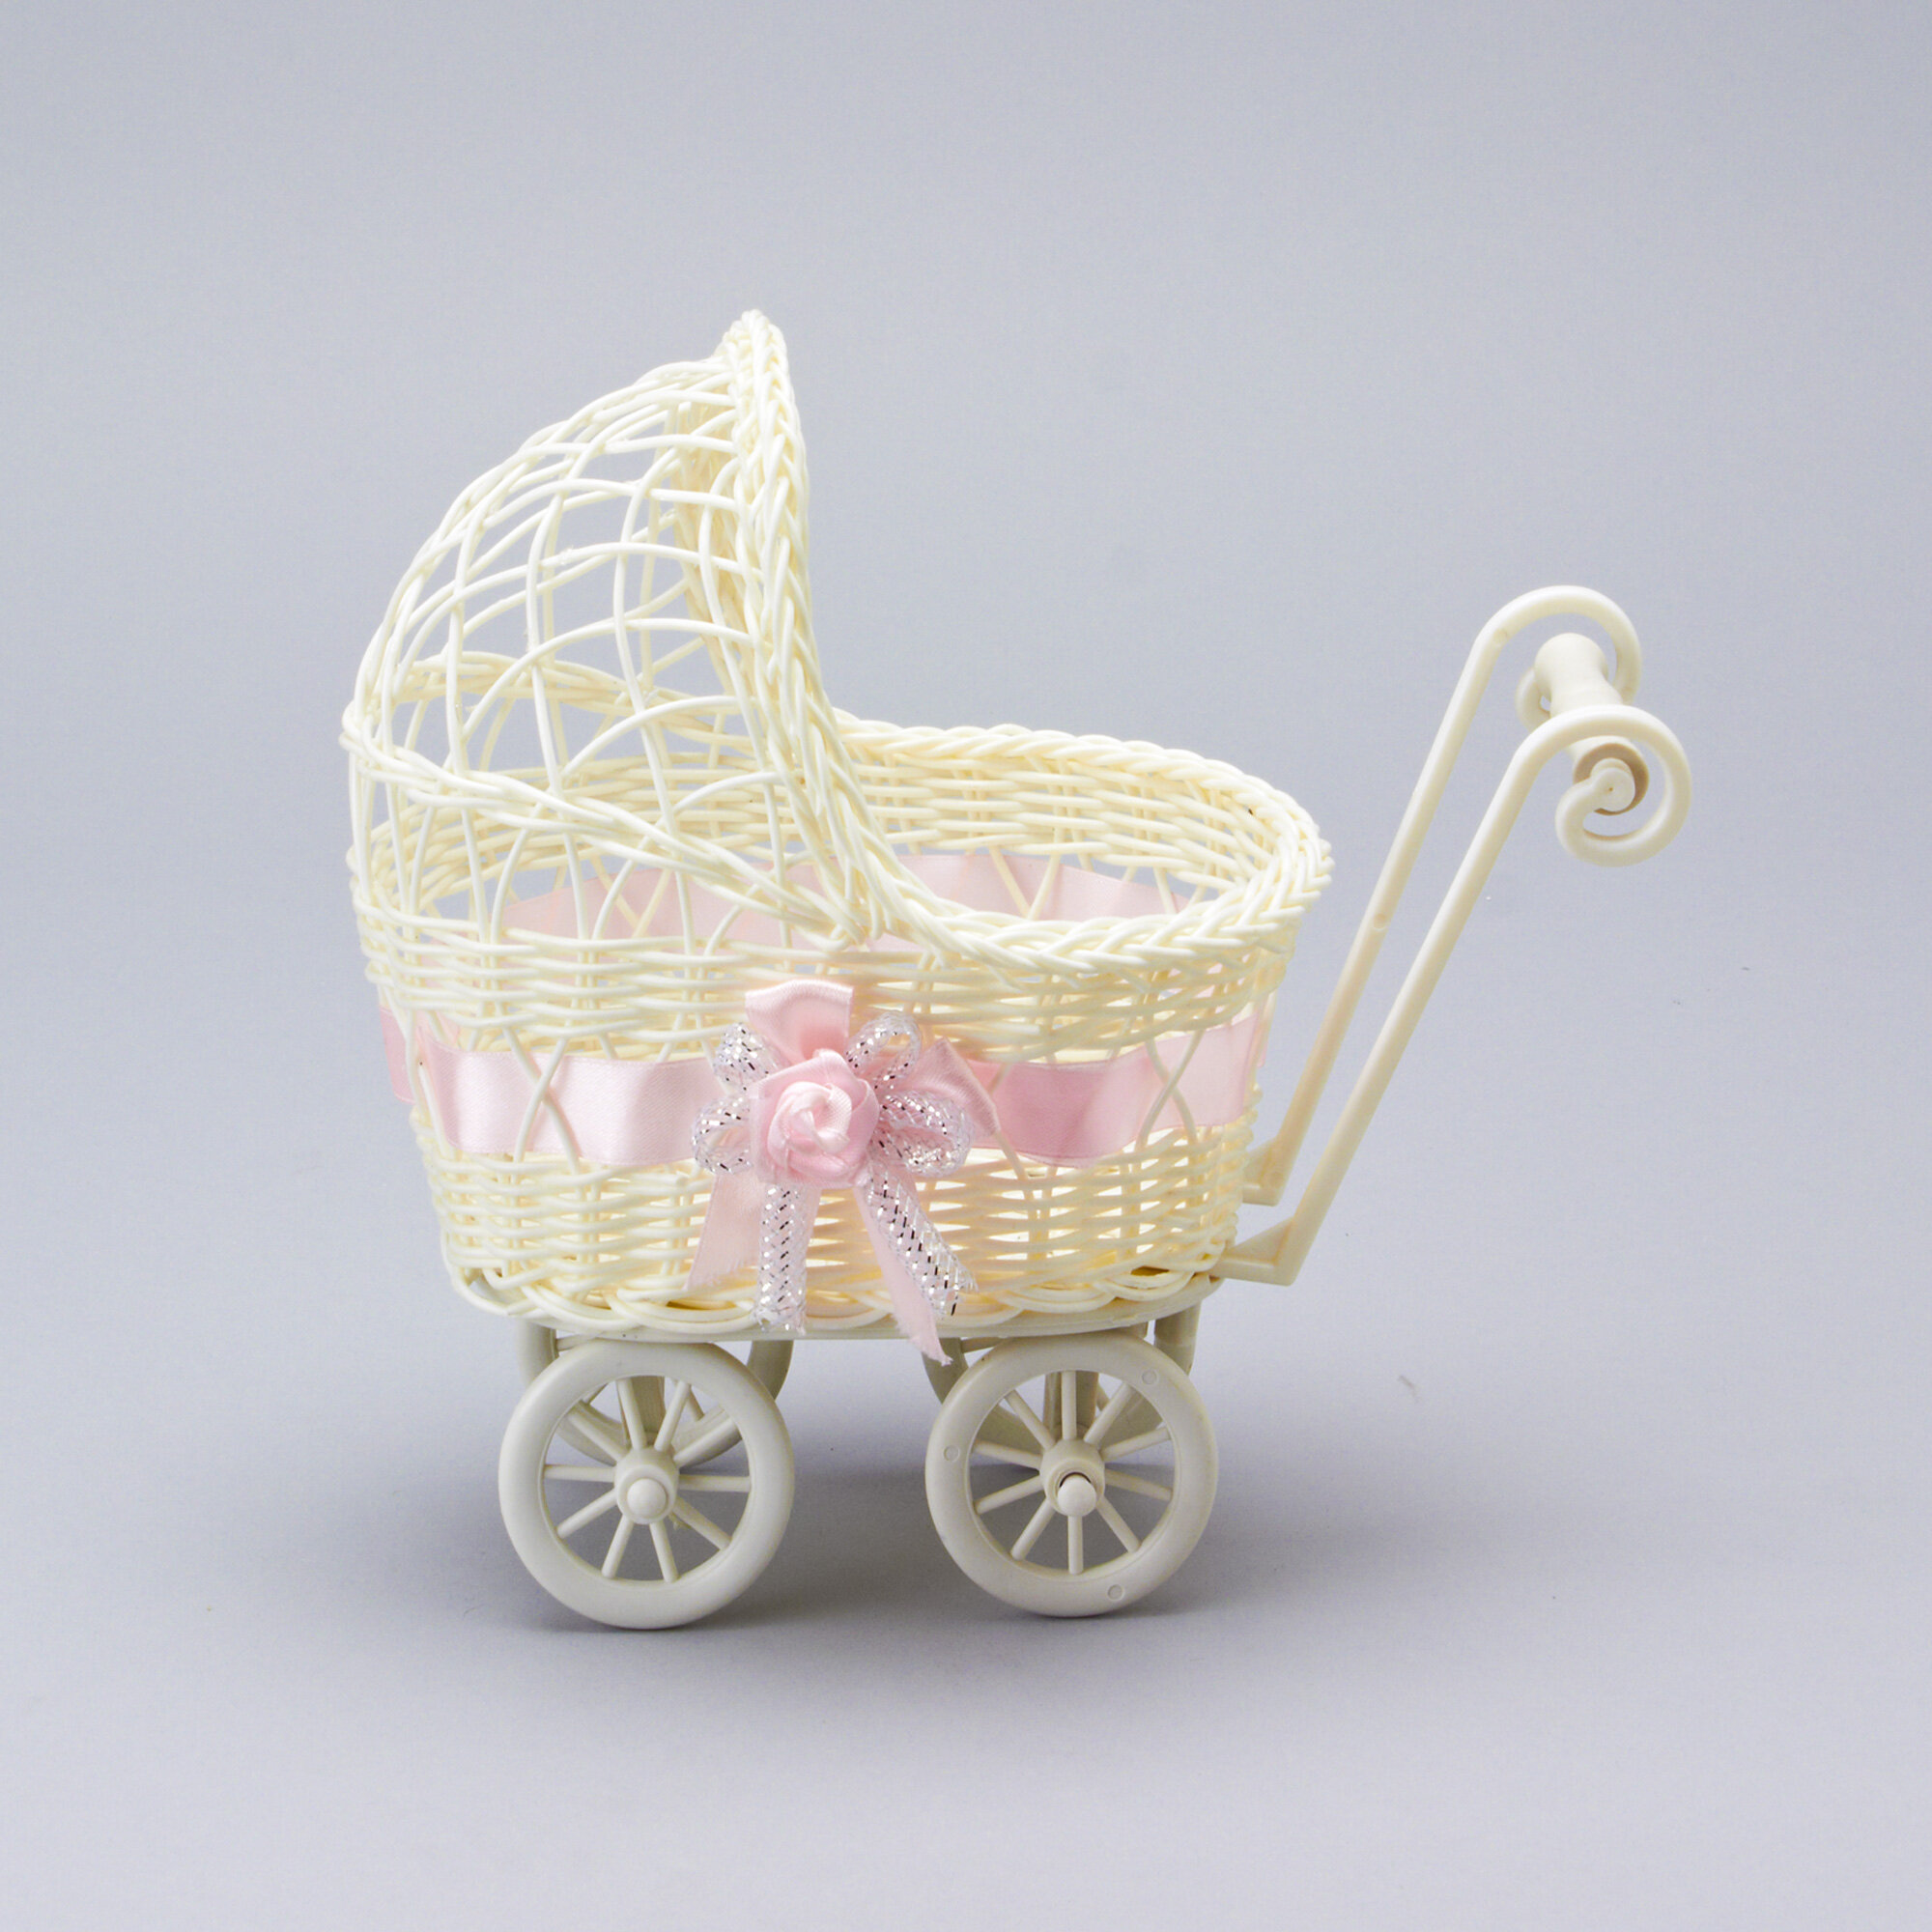 wicker baby carriage for baby shower